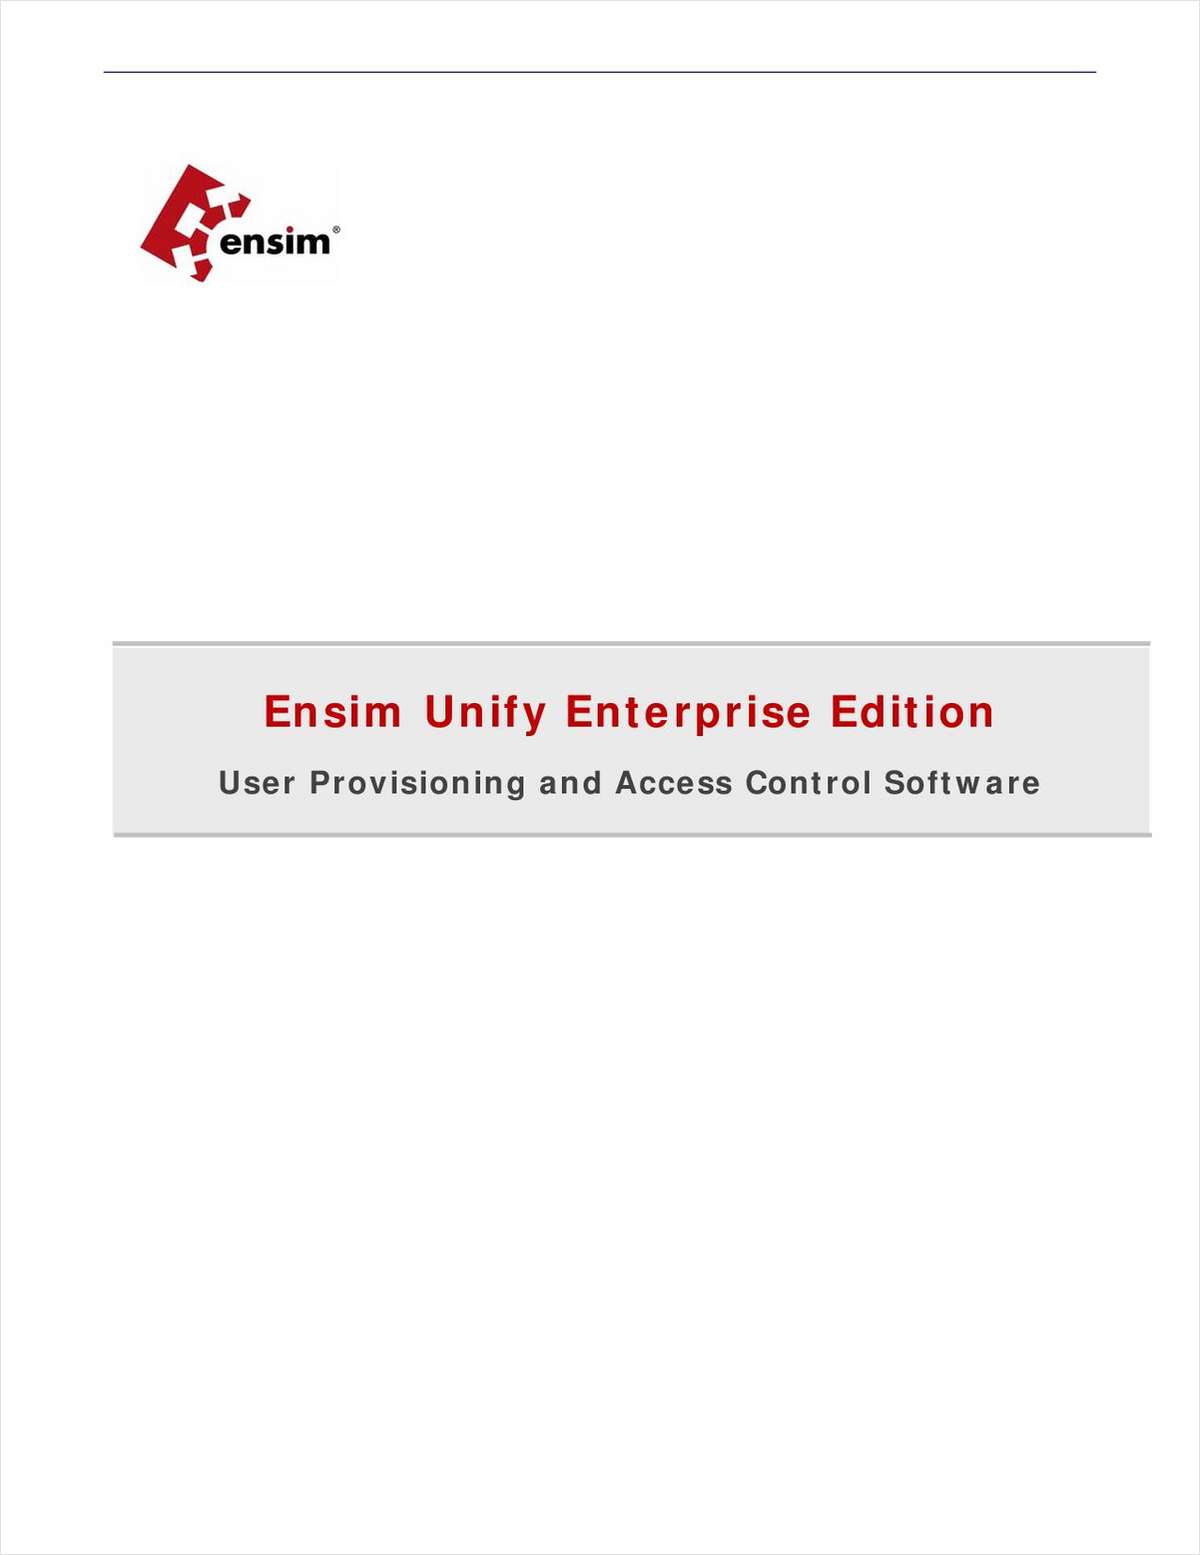 Ensim Unify Enterprise Edition: User Provisioning and Access Control Software